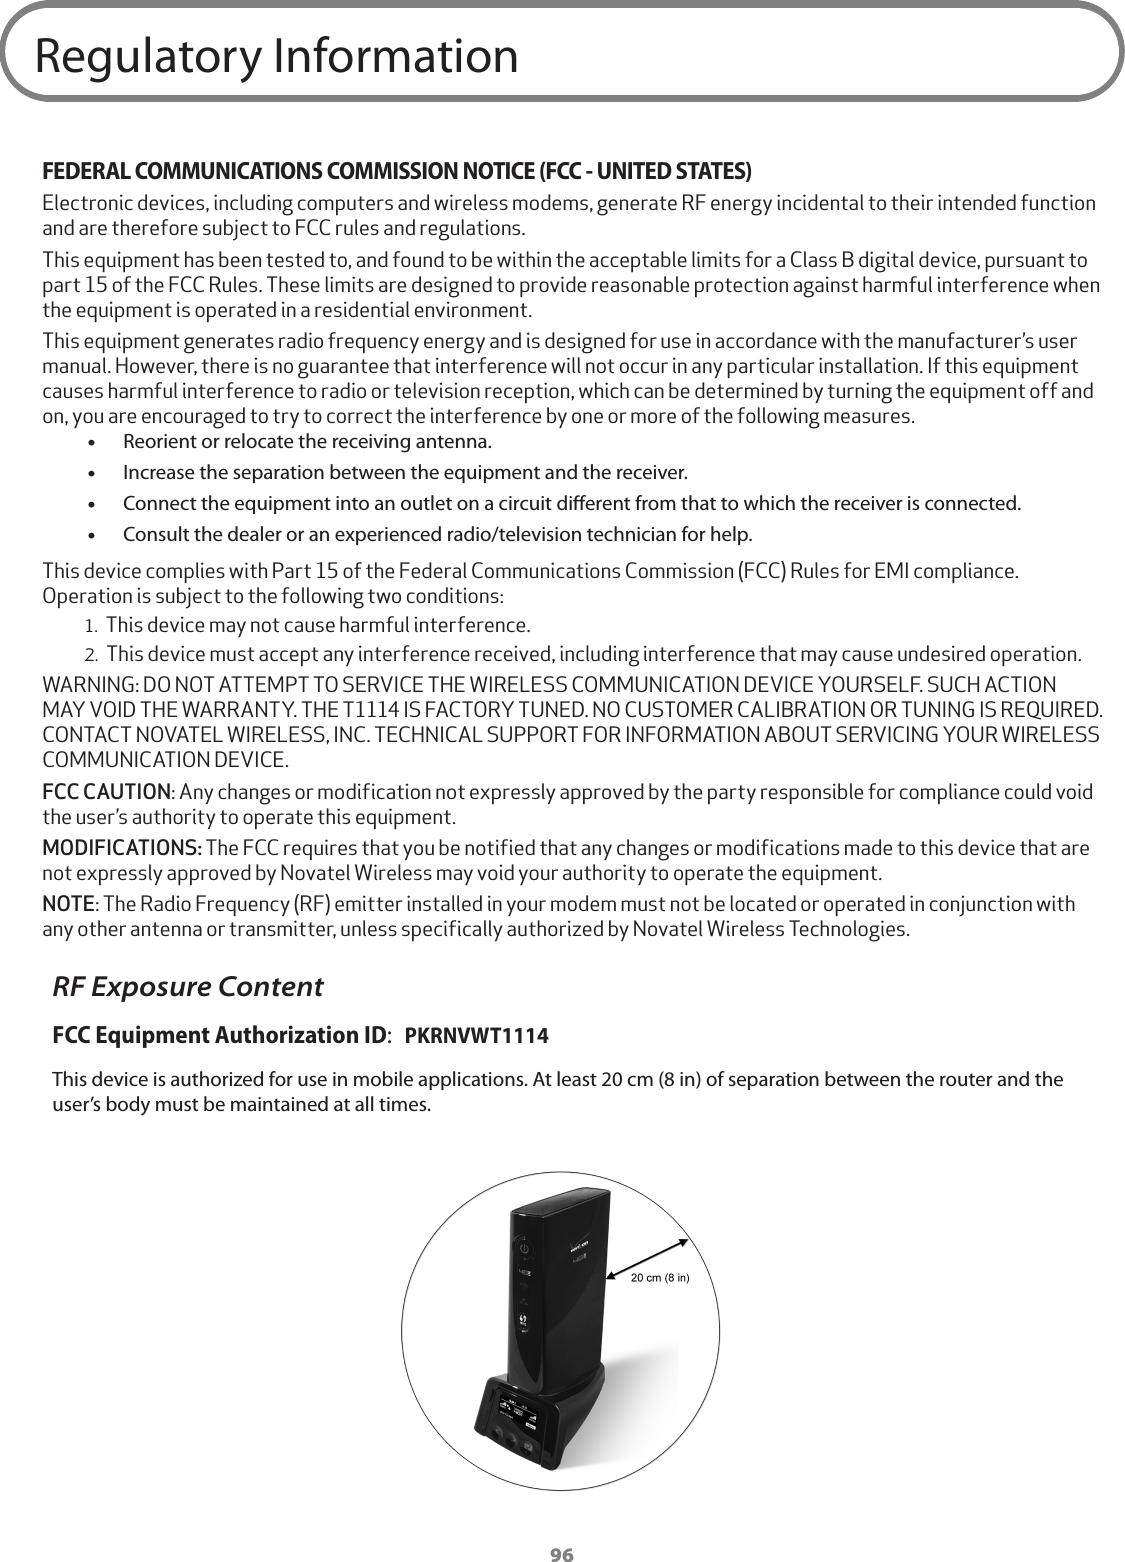 96Regulatory InformationFEDERAL COMMUNICATIONS COMMISSION NOTICE (FCC - UNITED STATES)Electronic devices, including computers and wireless modems, generate RF energy incidental to their intended function and are therefore subject to FCC rules and regulations.This equipment has been tested to, and found to be within the acceptable limits for a Class B digital device, pursuant to part 15 of the FCC Rules. These limits are designed to provide reasonable protection against harmful interference when the equipment is operated in a residential environment.This equipment generates radio frequency energy and is designed for use in accordance with the manufacturer’s user manual. However, there is no guarantee that interference will not occur in any particular installation. If this equipment causes harmful interference to radio or television reception, which can be determined by turning the equipment off and on, you are encouraged to try to correct the interference by one or more of the following measures. •Reorient or relocate the receiving antenna. •Increase the separation between the equipment and the receiver. •Connect the equipment into an outlet on a circuit dierent from that to which the receiver is connected. •Consult the dealer or an experienced radio/television technician for help.This device complies with Part 15 of the Federal Communications Commission (FCC) Rules for EMI compliance. Operation is subject to the following two conditions:1. This device may not cause harmful interference.2. This device must accept any interference received, including interference that may cause undesired operation.WARNING: DO NOT ATTEMPT TO SERVICE THE WIRELESS COMMUNICATION DEVICE YOURSELF. SUCH ACTION MAY VOID THE WARRANTY. THE T1114 IS FACTORY TUNED. NO CUSTOMER CALIBRATION OR TUNING IS REQUIRED. CONTACT NOVATEL WIRELESS, INC. TECHNICAL SUPPORT FOR INFORMATION ABOUT SERVICING YOUR WIRELESS COMMUNICATION DEVICE.FCC CAUTION: Any changes or modification not expressly approved by the party responsible for compliance could void the user’s authority to operate this equipment.MODIFICATIONS: The FCC requires that you be notified that any changes or modifications made to this device that are not expressly approved by Novatel Wireless may void your authority to operate the equipment.NOTE: The Radio Frequency (RF) emitter installed in your modem must not be located or operated in conjunction with any other antenna or transmitter, unless specifically authorized by Novatel Wireless Technologies.RF Exposure ContentFCC Equipment Authorization ID:  PKRNVWT1114This device is authorized for use in mobile applications. At least 20 cm (8 in) of separation between the router and the user’s body must be maintained at all times.